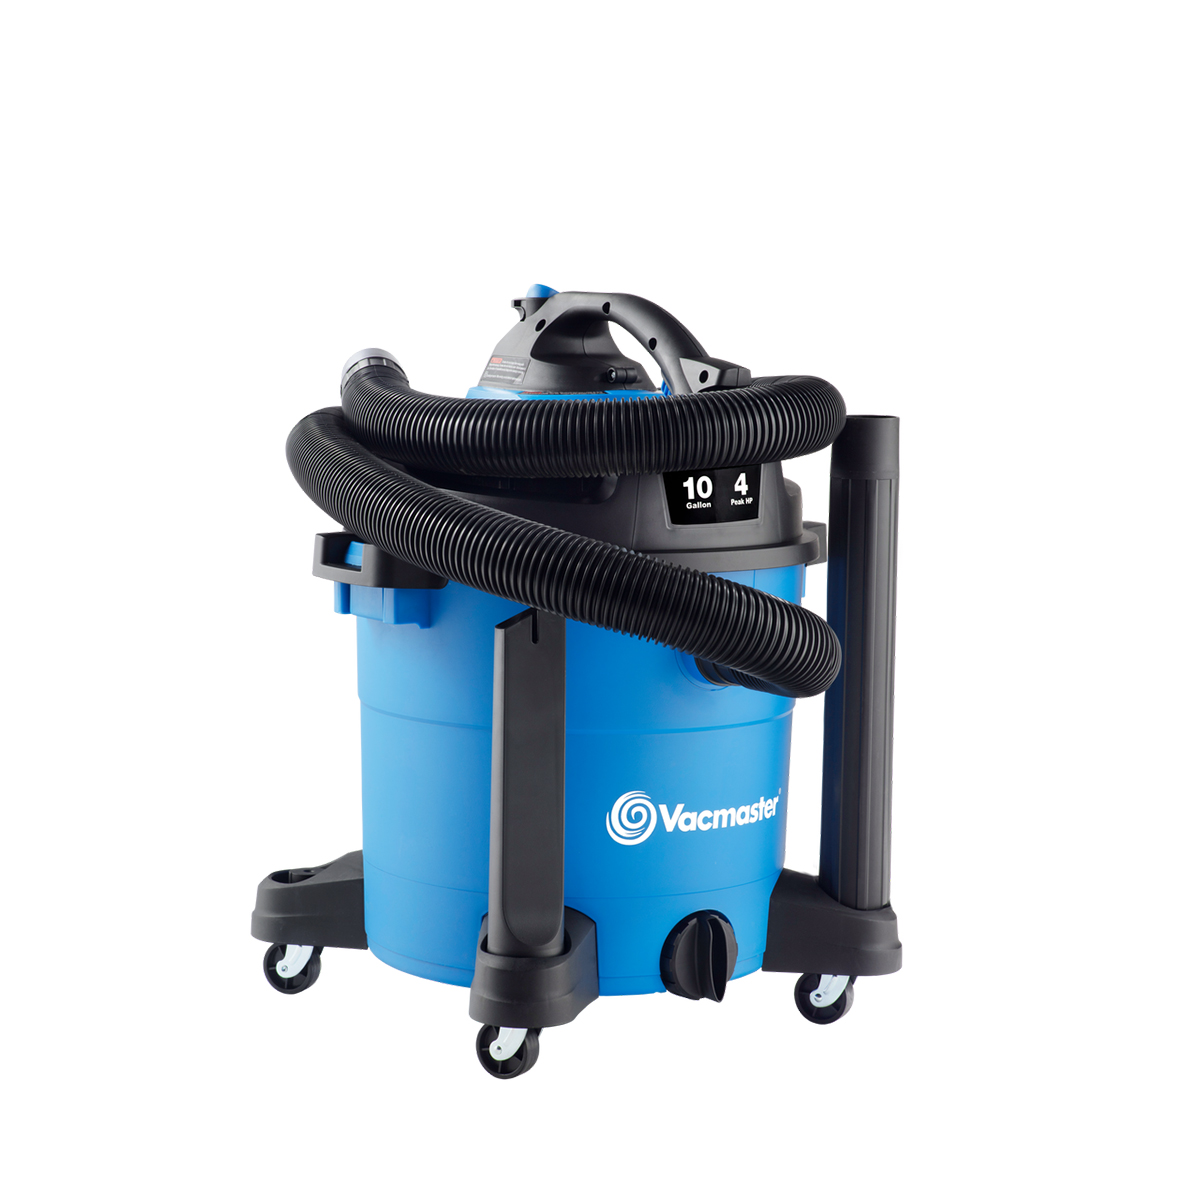 Vacmaster 10 Gallon Wet/Dry Vacuum With Detachable Blower